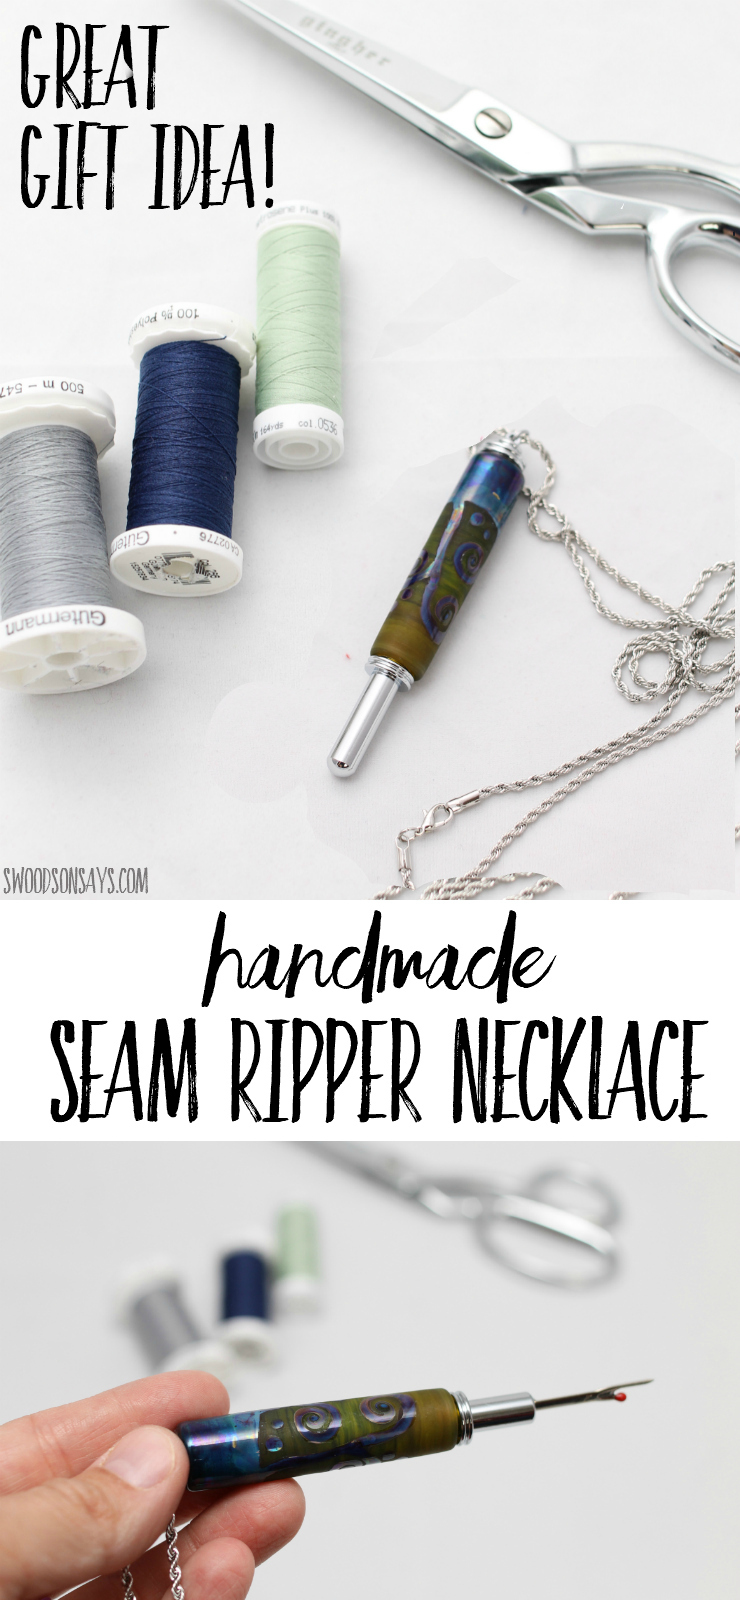 Looking for fabric lovers gift ideas? Check out this beautiful handmade seam ripper necklace! Perfect gift for someone who loves sewing, it is beautiful and functional, flipping around to cover the top safely while you wear it. This is an affiliate link to the Etsy shop where you can buy one. #etsy #handmade#giftsforpeoplewhosew #giftsforsewists #seamripper #seamrippernecklace